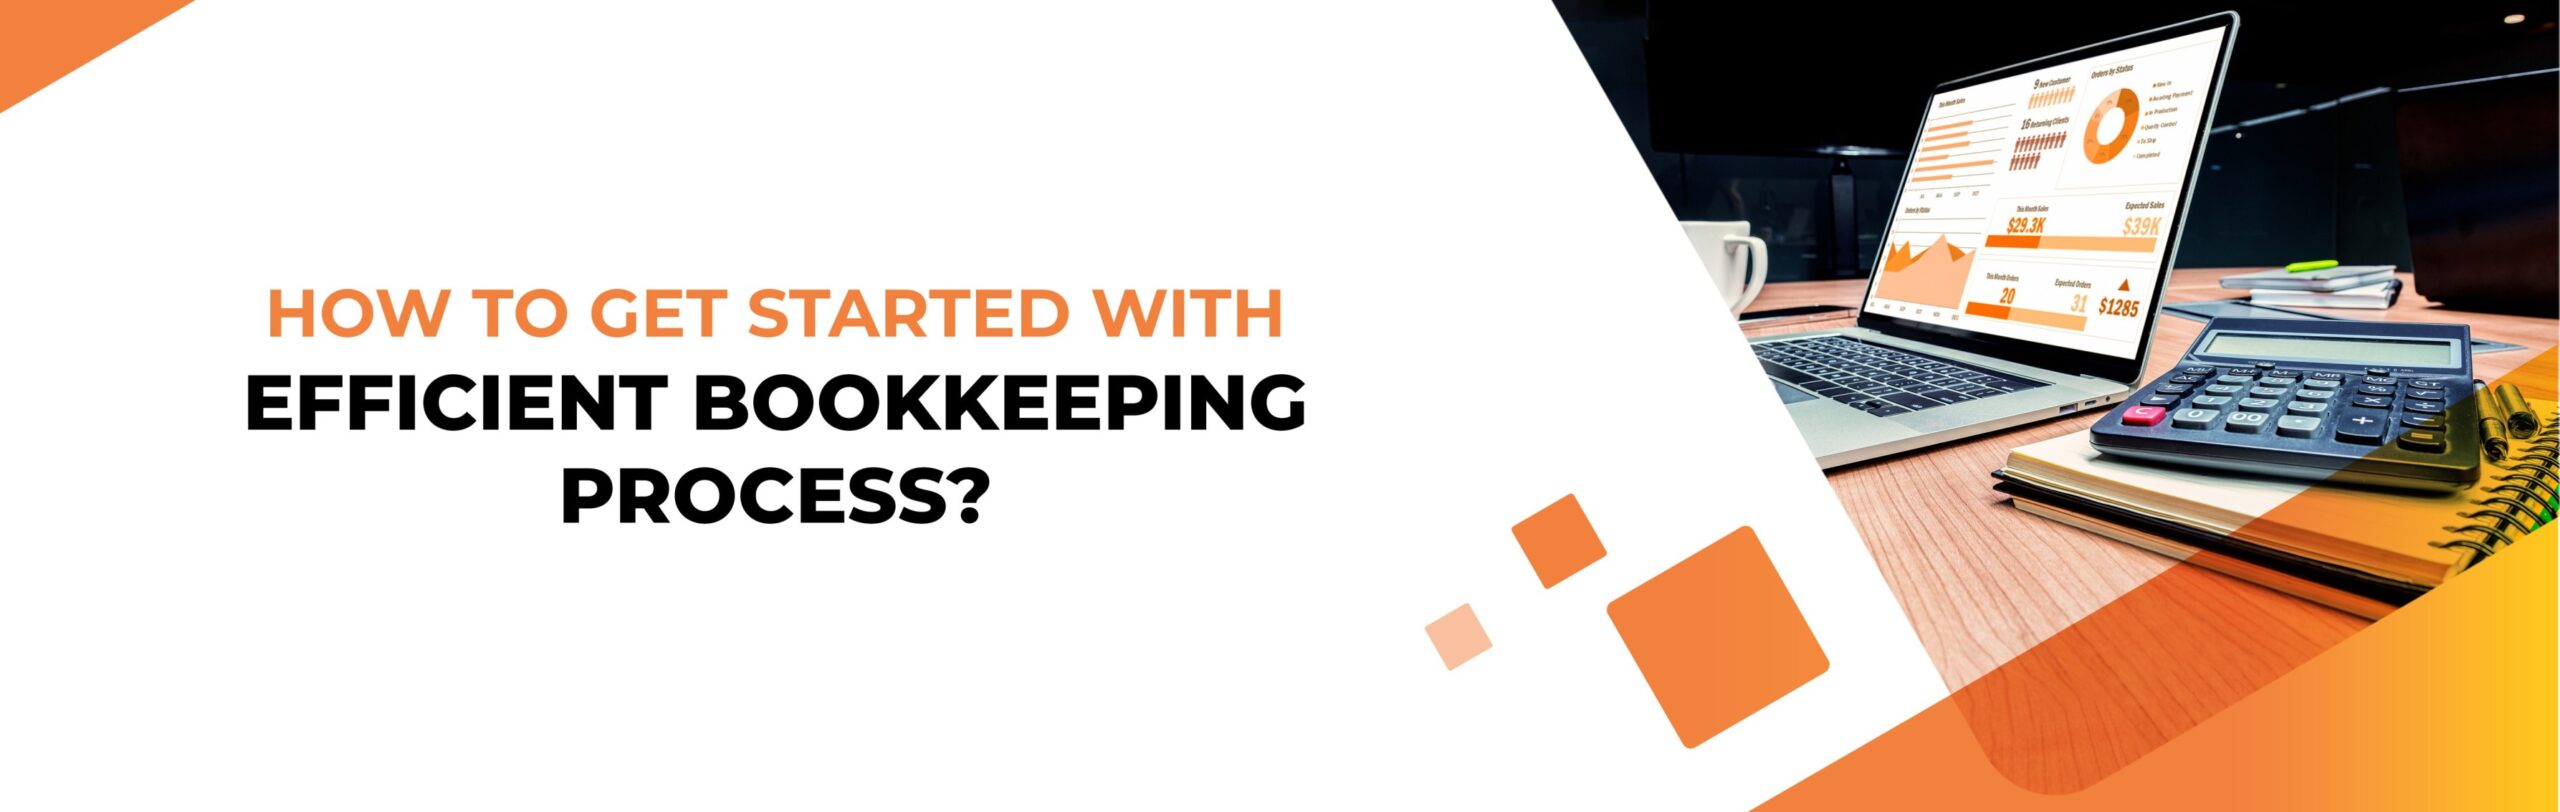 How To Get Started with Efficient Bookkeeping Process